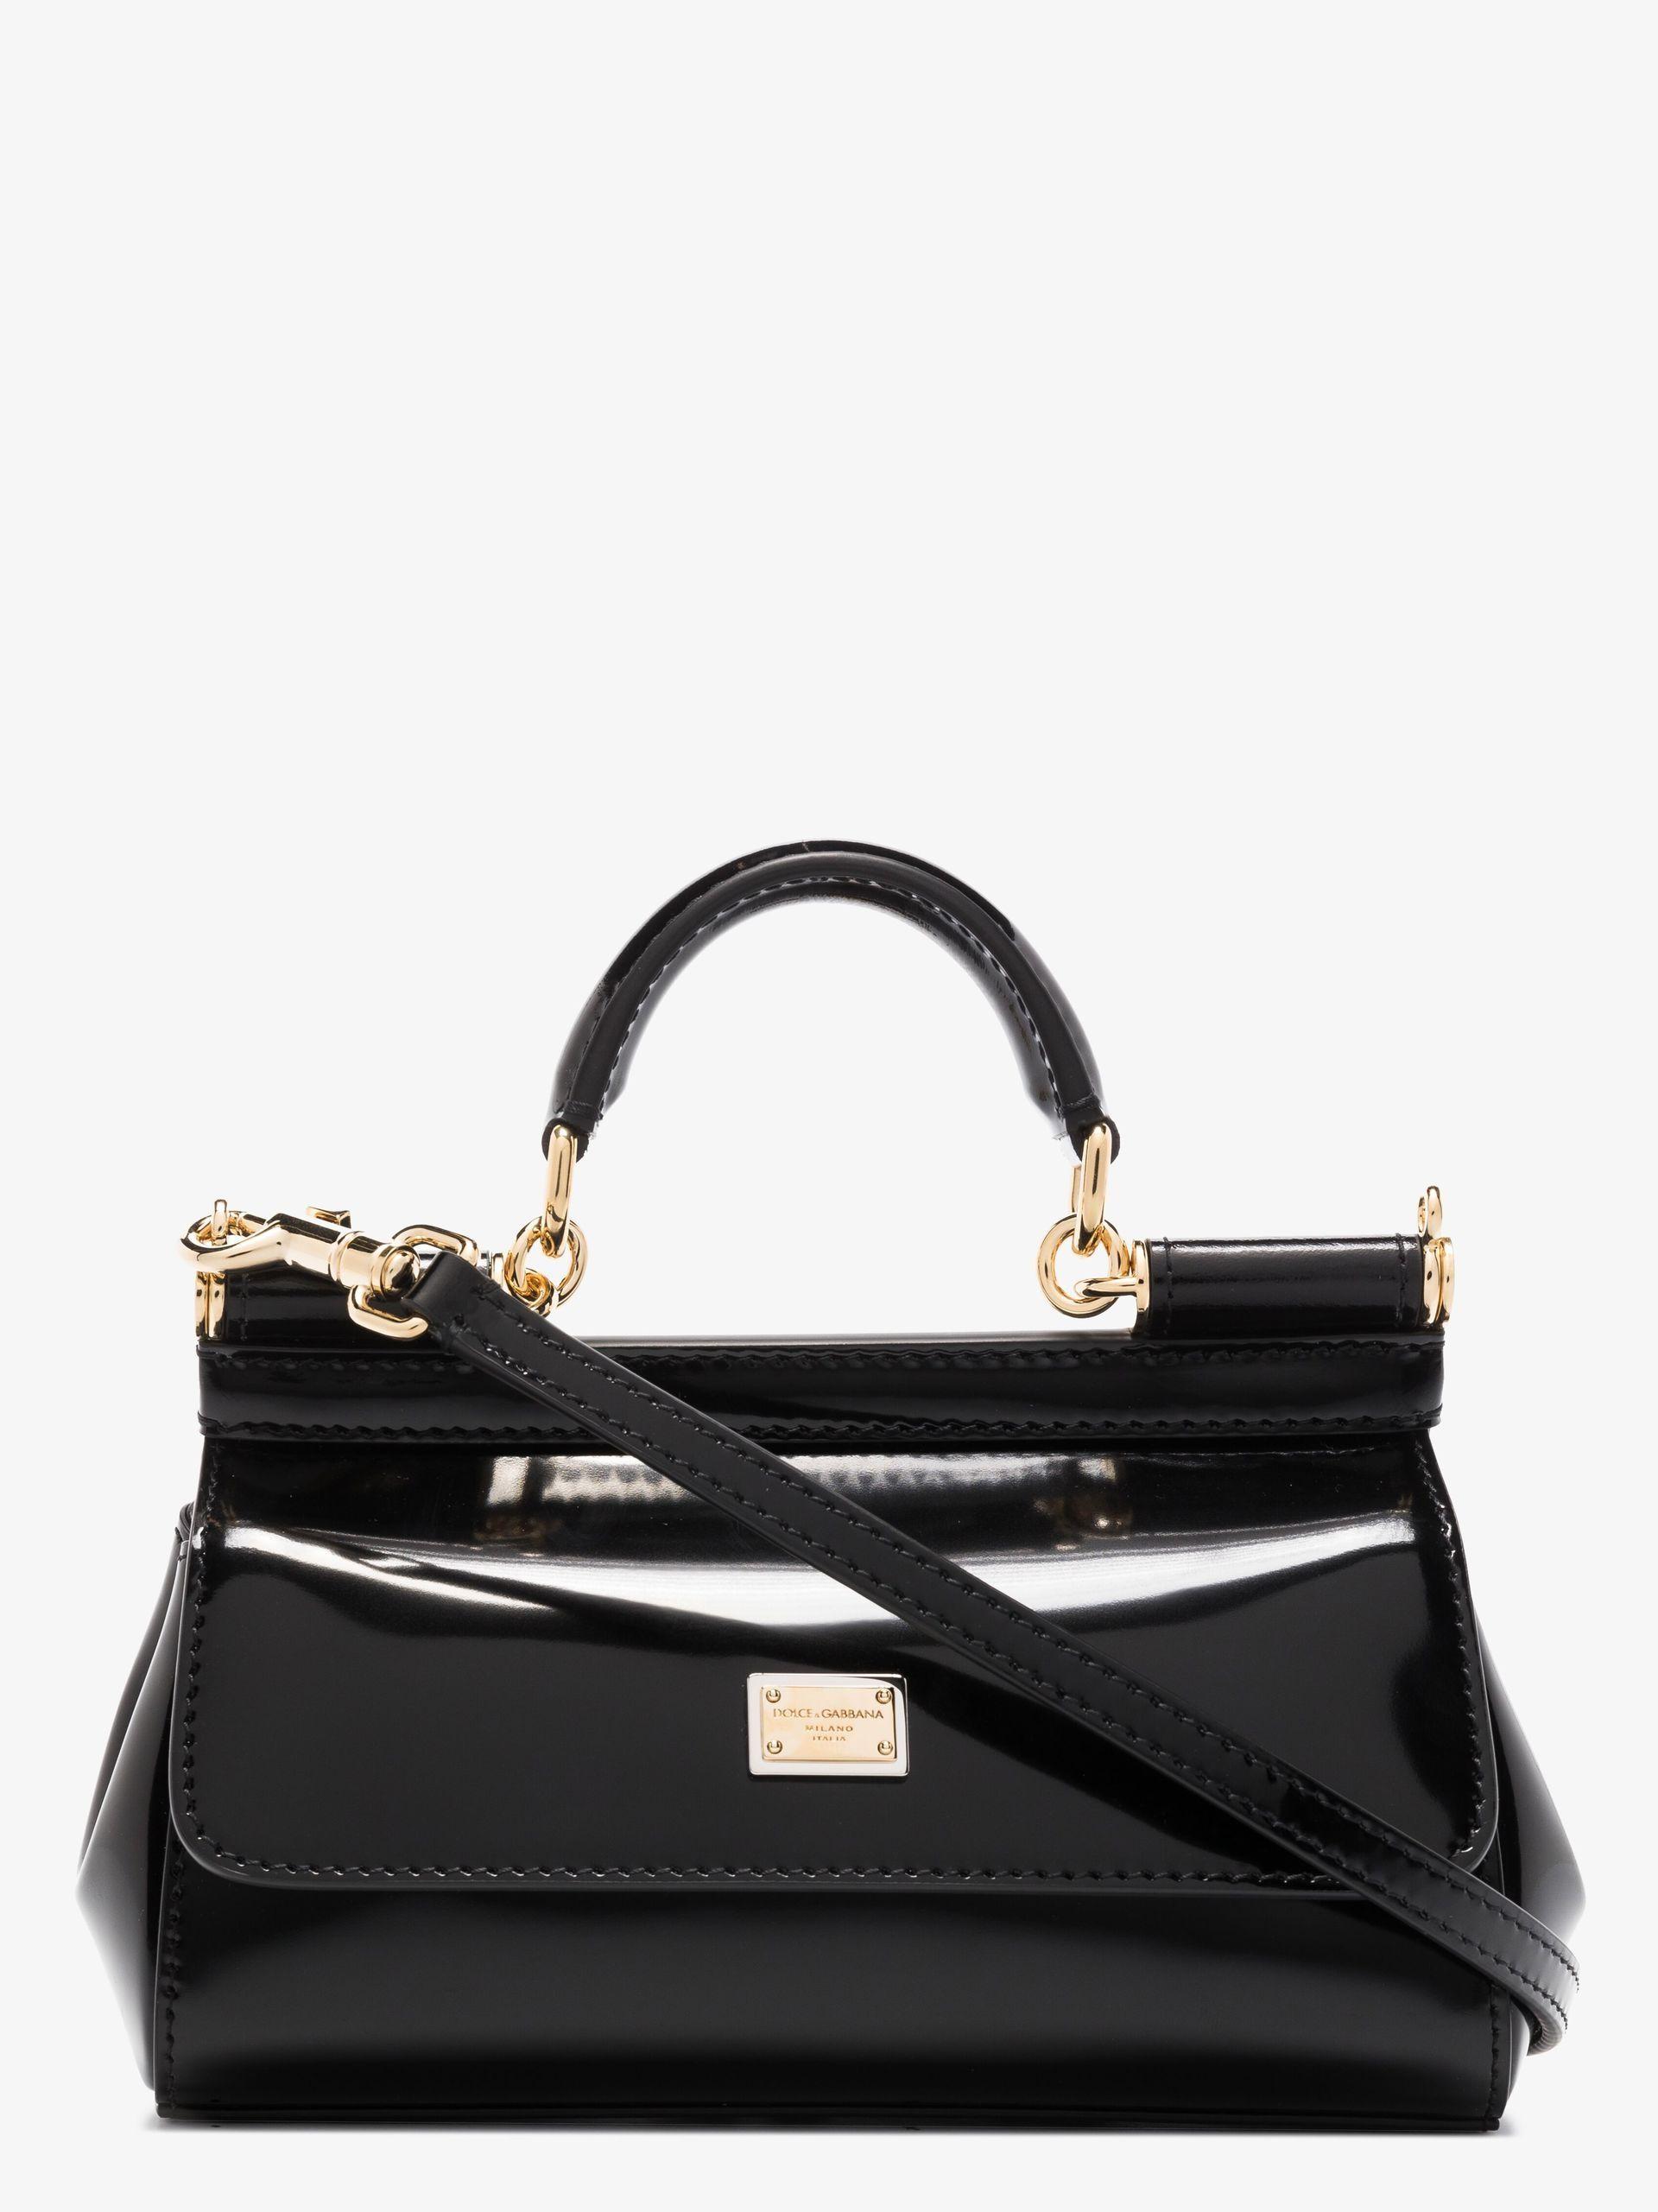 DOLCE & GABBANA: Sicily bag in patent leather - Gnawed Blue